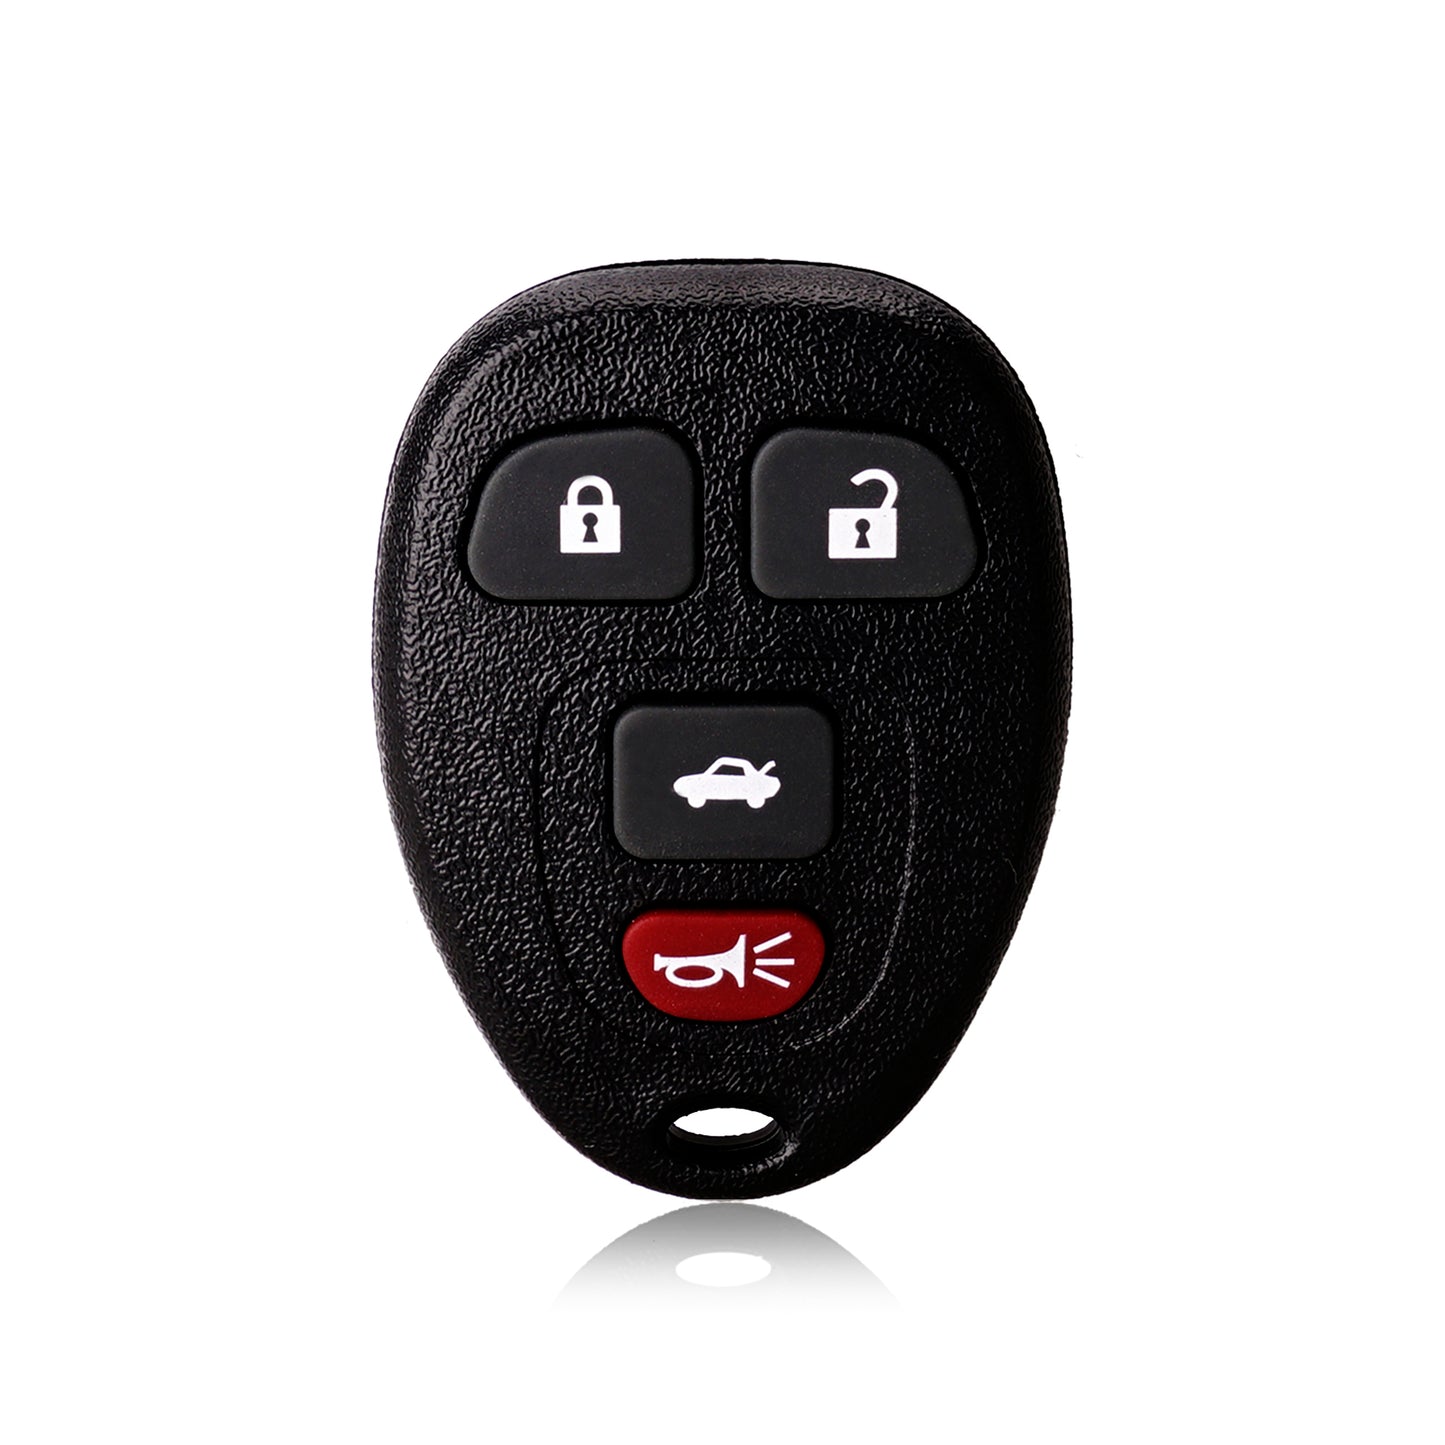 4 Buttons 315MHz Keyless Entry Fob Remote Car Key For 2006 - 2016 Chevrolet Impala Monte Carlo Equinox Buick Lucerne Cadillac DTS FCC ID: OUC60270 SKU : J020